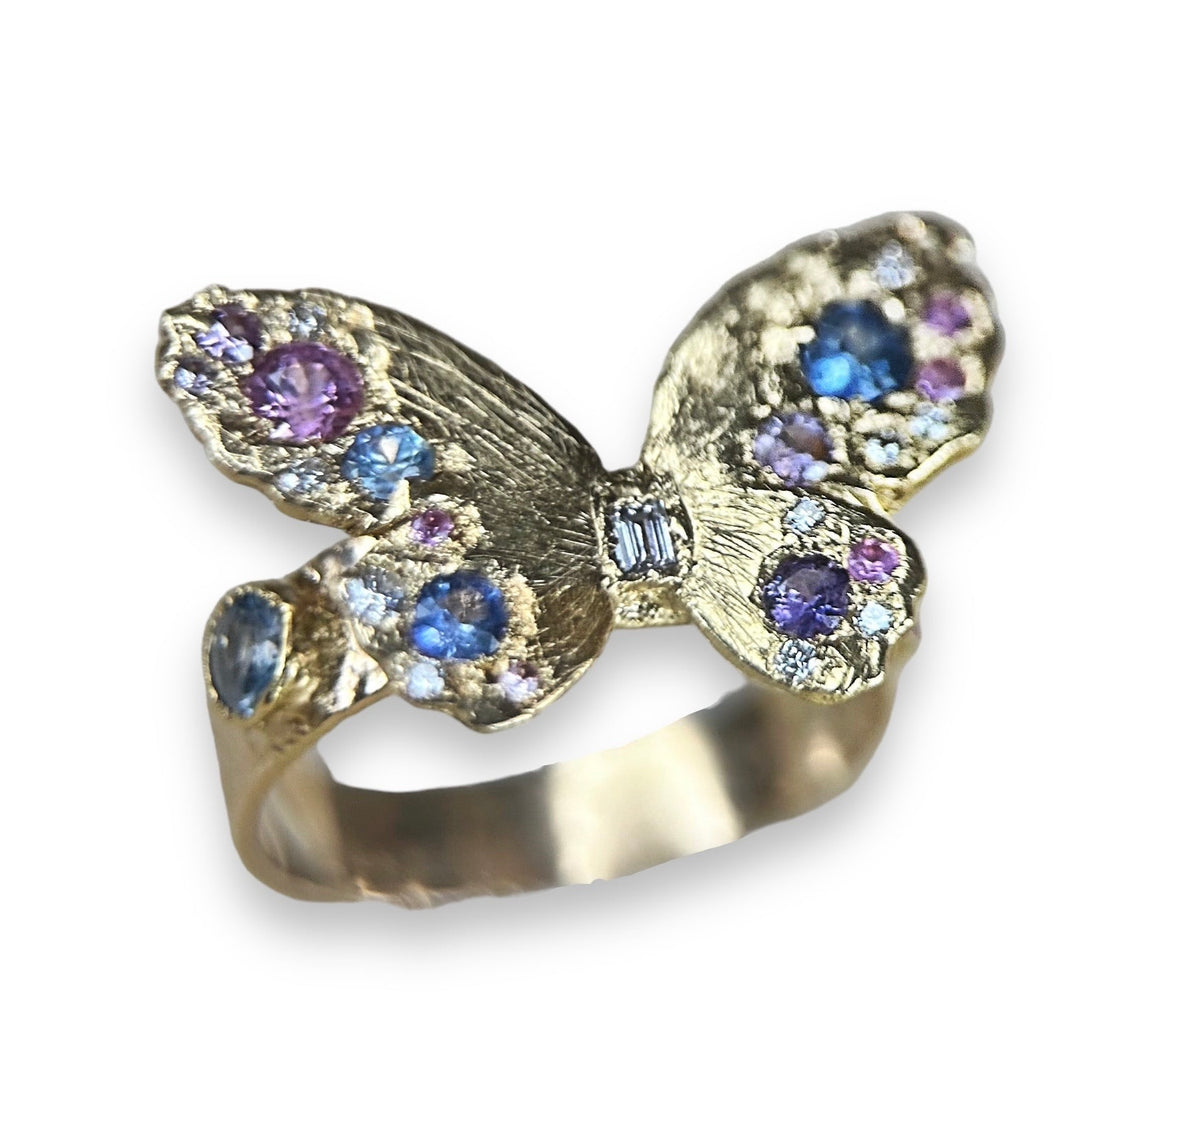 Butterfly Ring “Spread Your Wings” with Diamonds and Sapphires 18 ct Gold (Exclusive to Tomfoolery London)